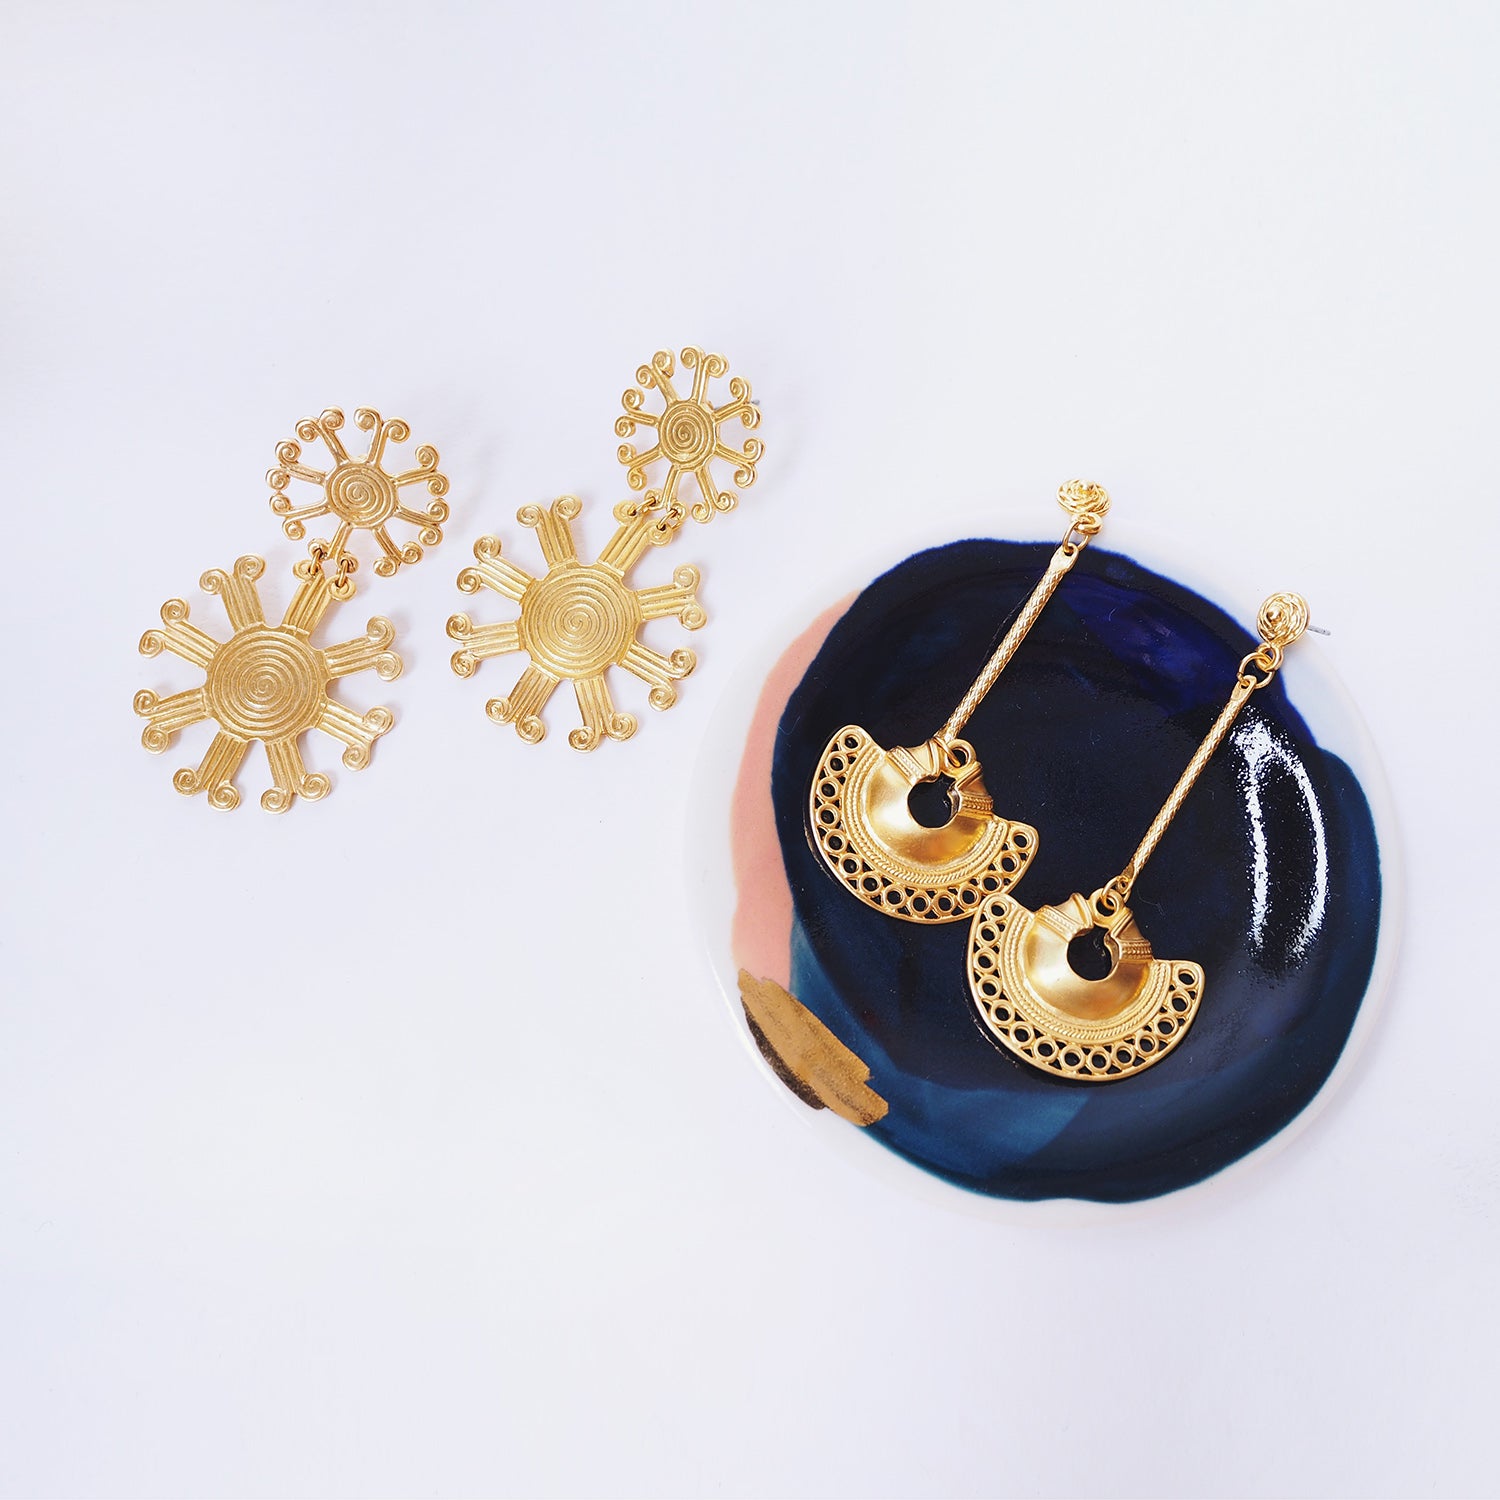 These earrings are a reproduction of pre-colombian jewellery found in the Americas before the Conquistadors arrived. Much of the gold was melted and shipped back to Spain but what little survived can be found in the Museums of Pre-Colombian art in the region. These earrings take on pre-colombian elements and reassemble them into earrings.